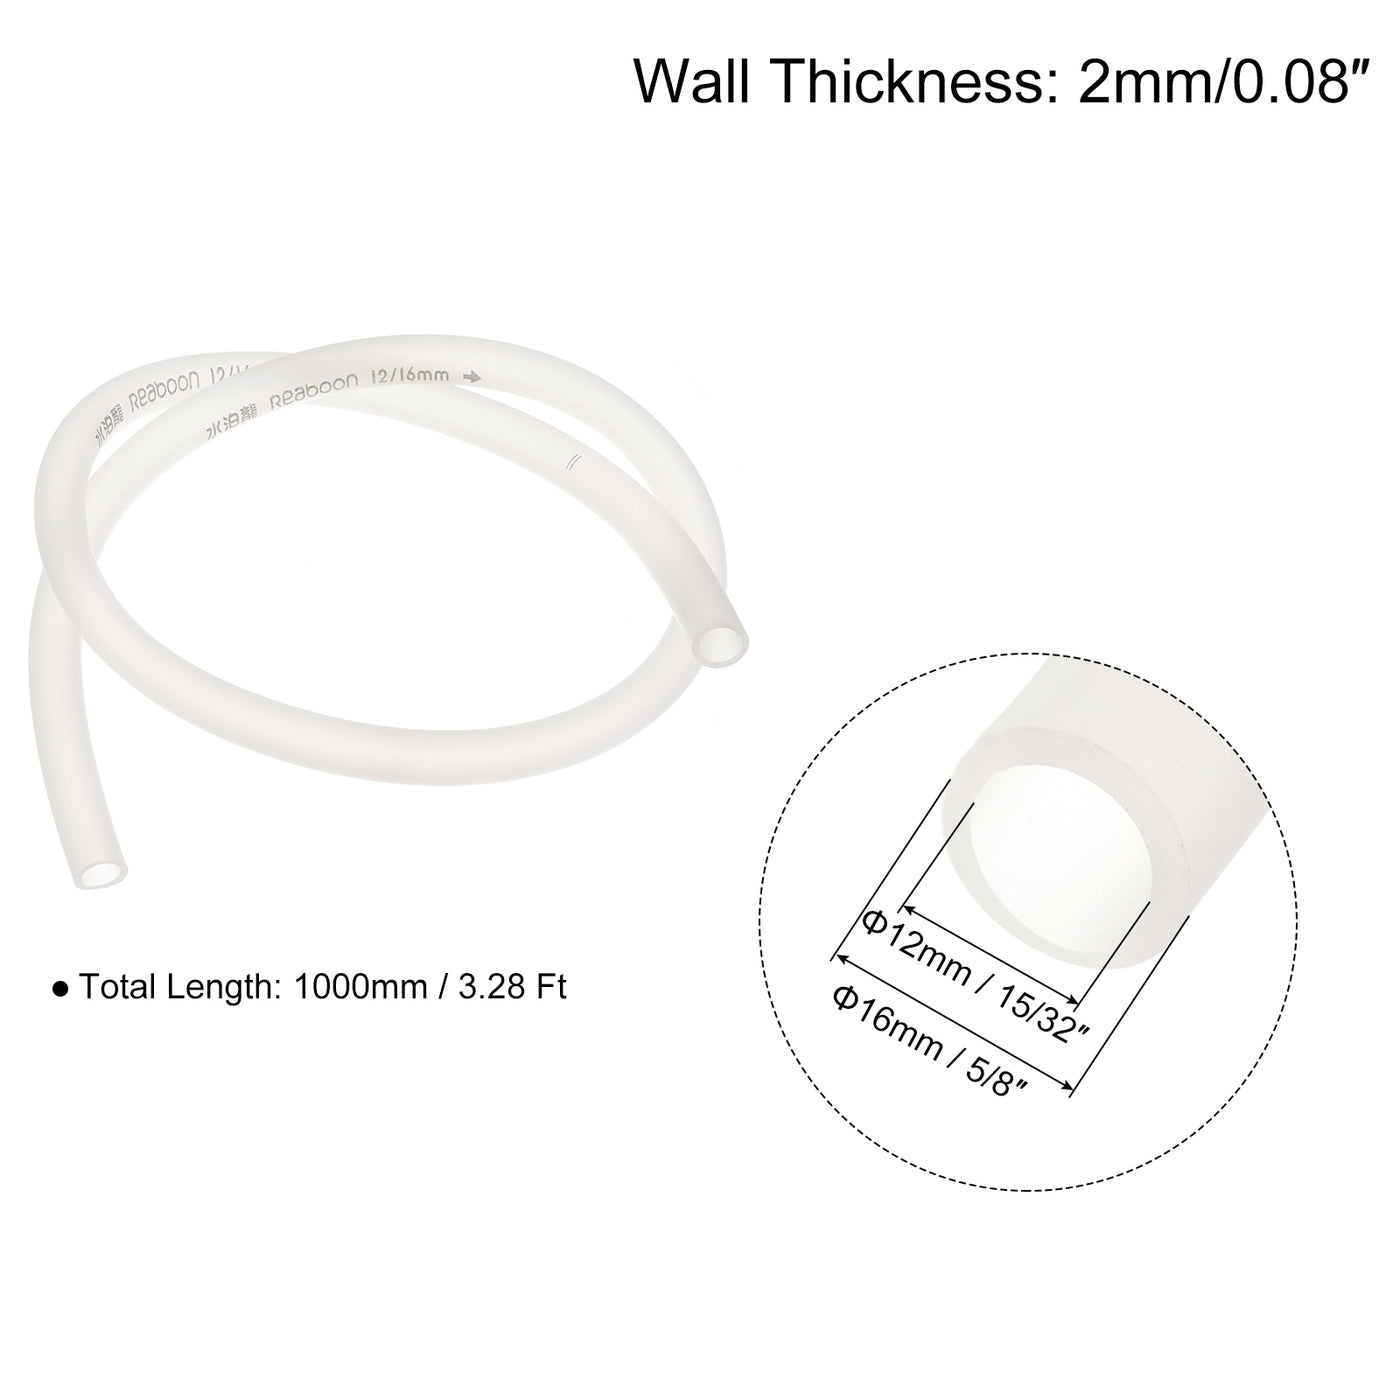 uxcell Uxcell PVC Tubing 15/32" ID, 5/8" OD 4Pcs 3.28 Ft for Transfer, White